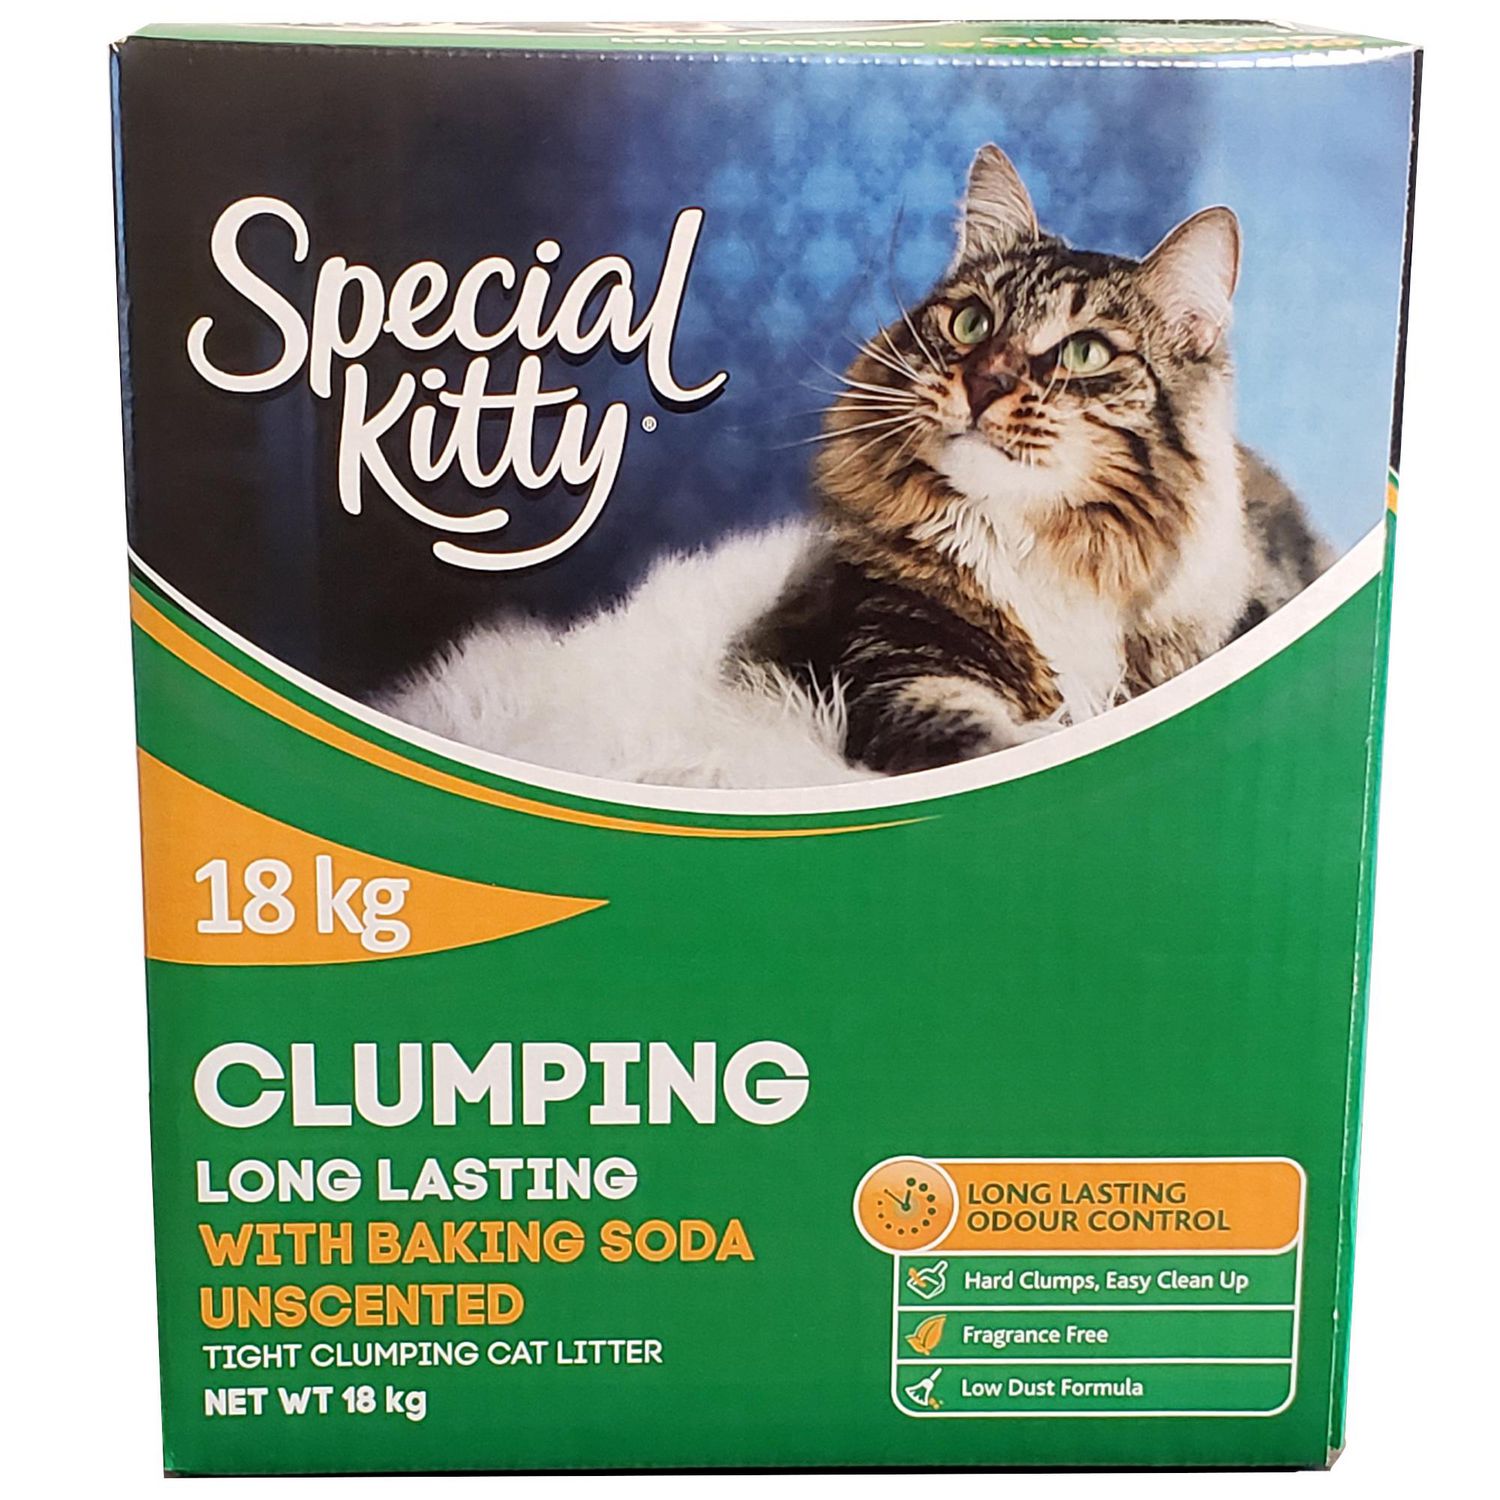 Special Kitty® Clumping Long Lasting Cat Litter 18 kg Walmart Canada